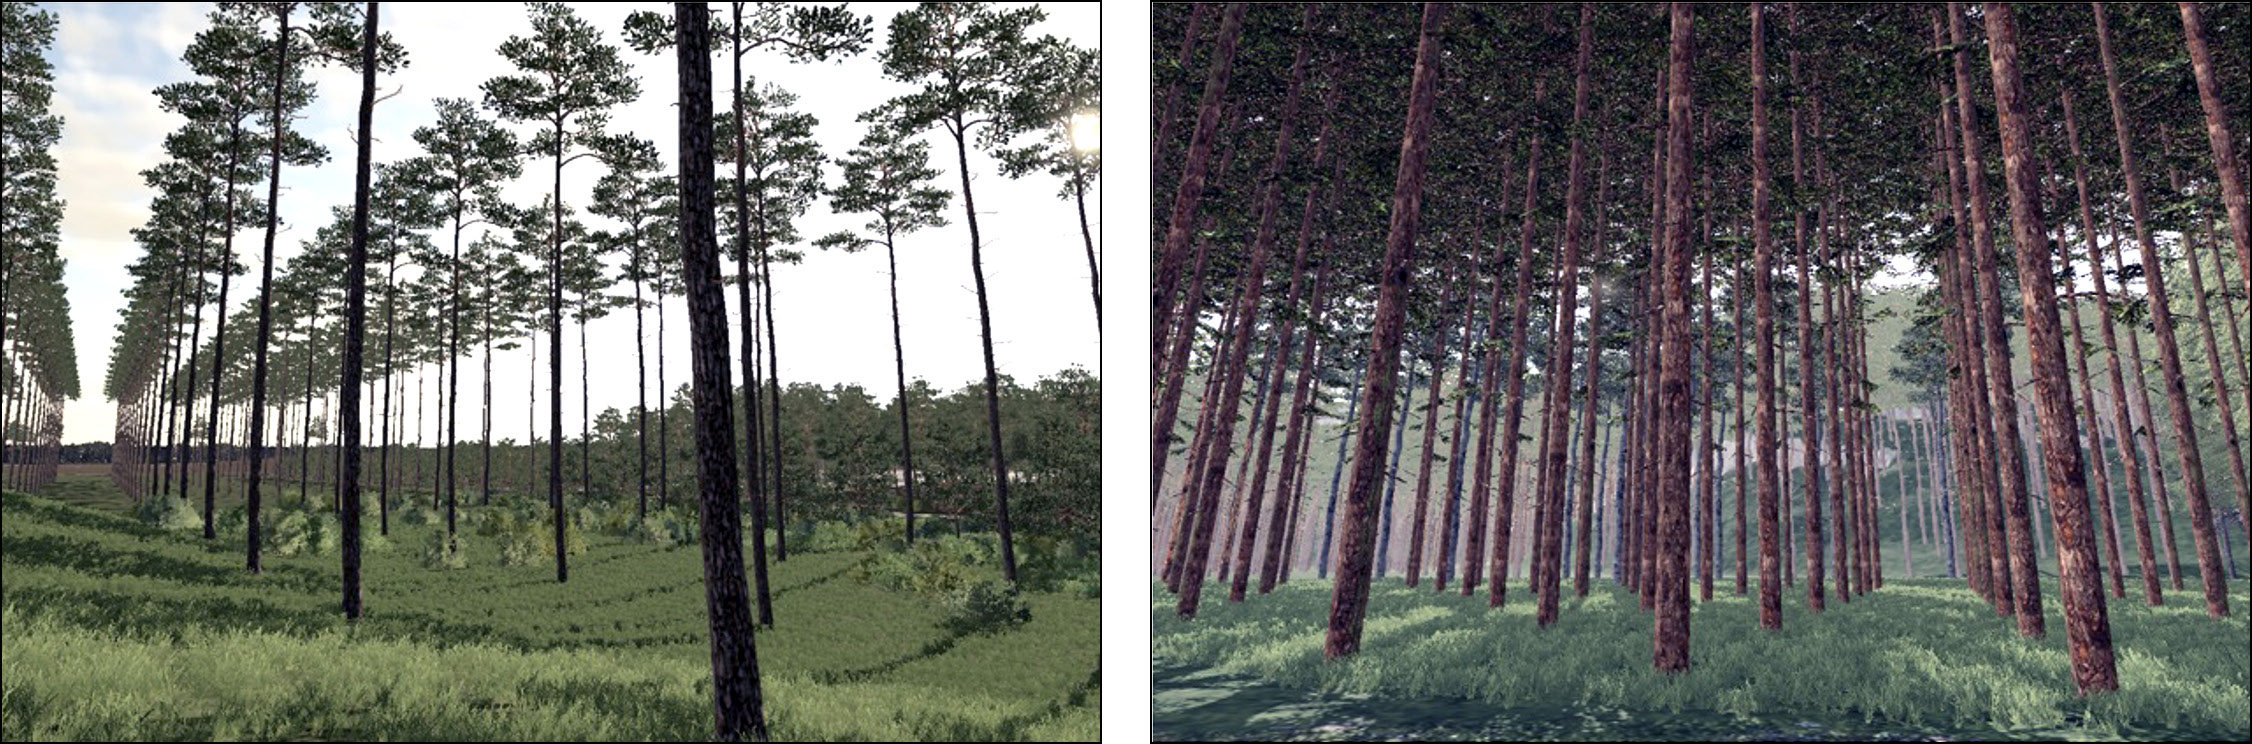 Two images of pine plantations.